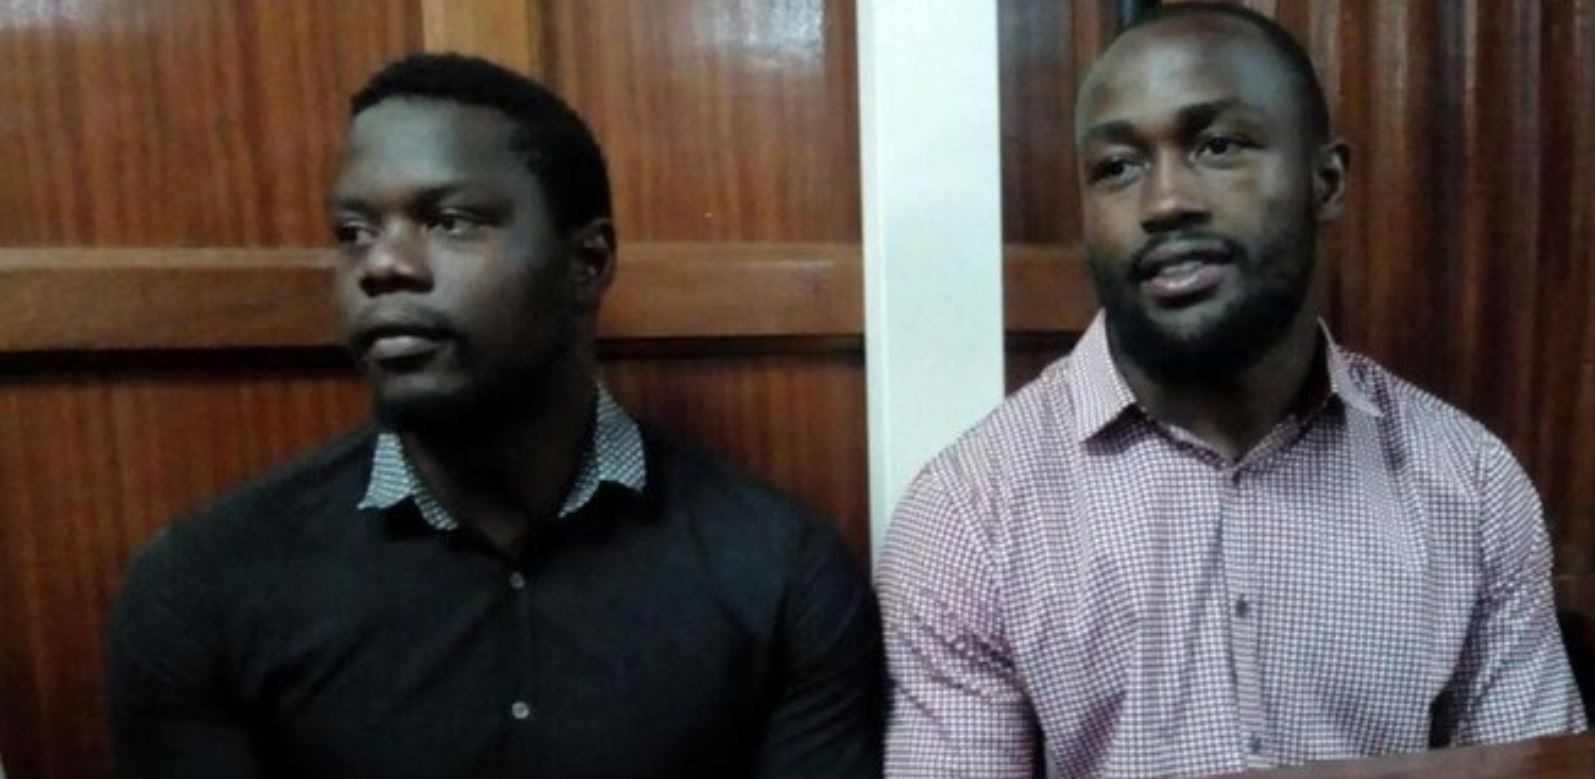 Judges Ruling on the sentencing of Rugby Players Alex Mahaga and Frank Wanyama over rape case